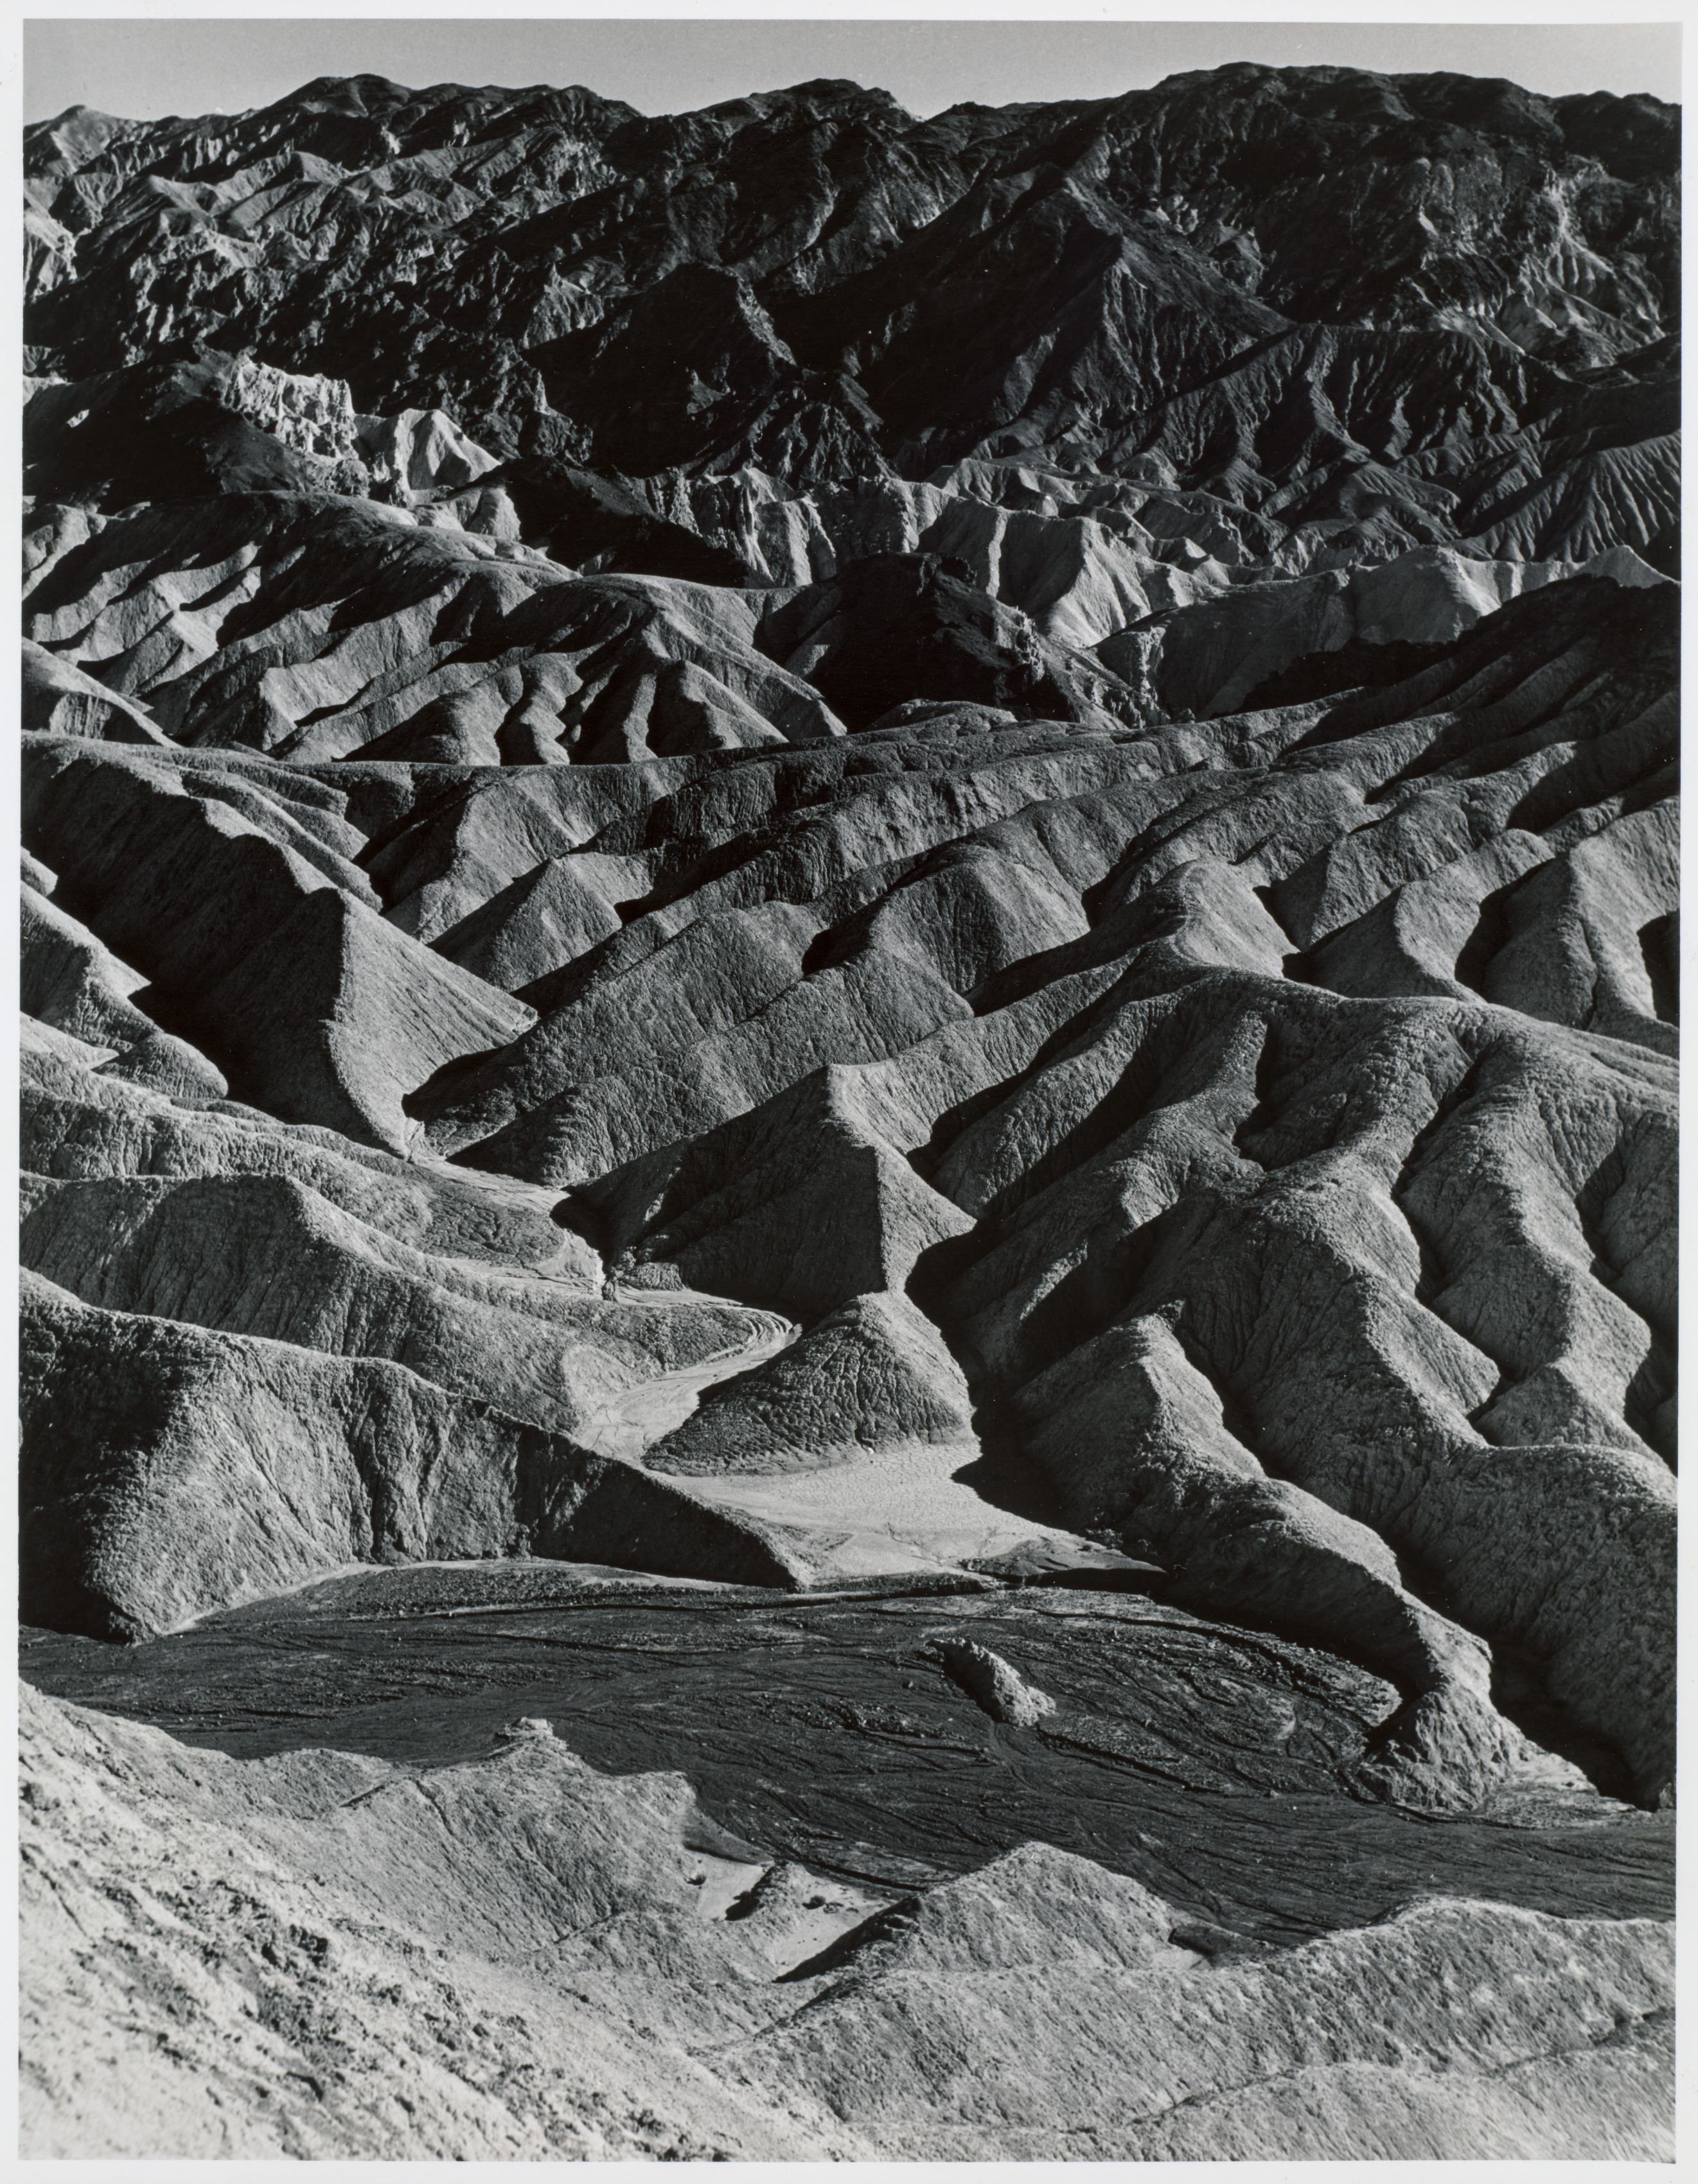 Badlands in the Panamint Range, Death Valley, California